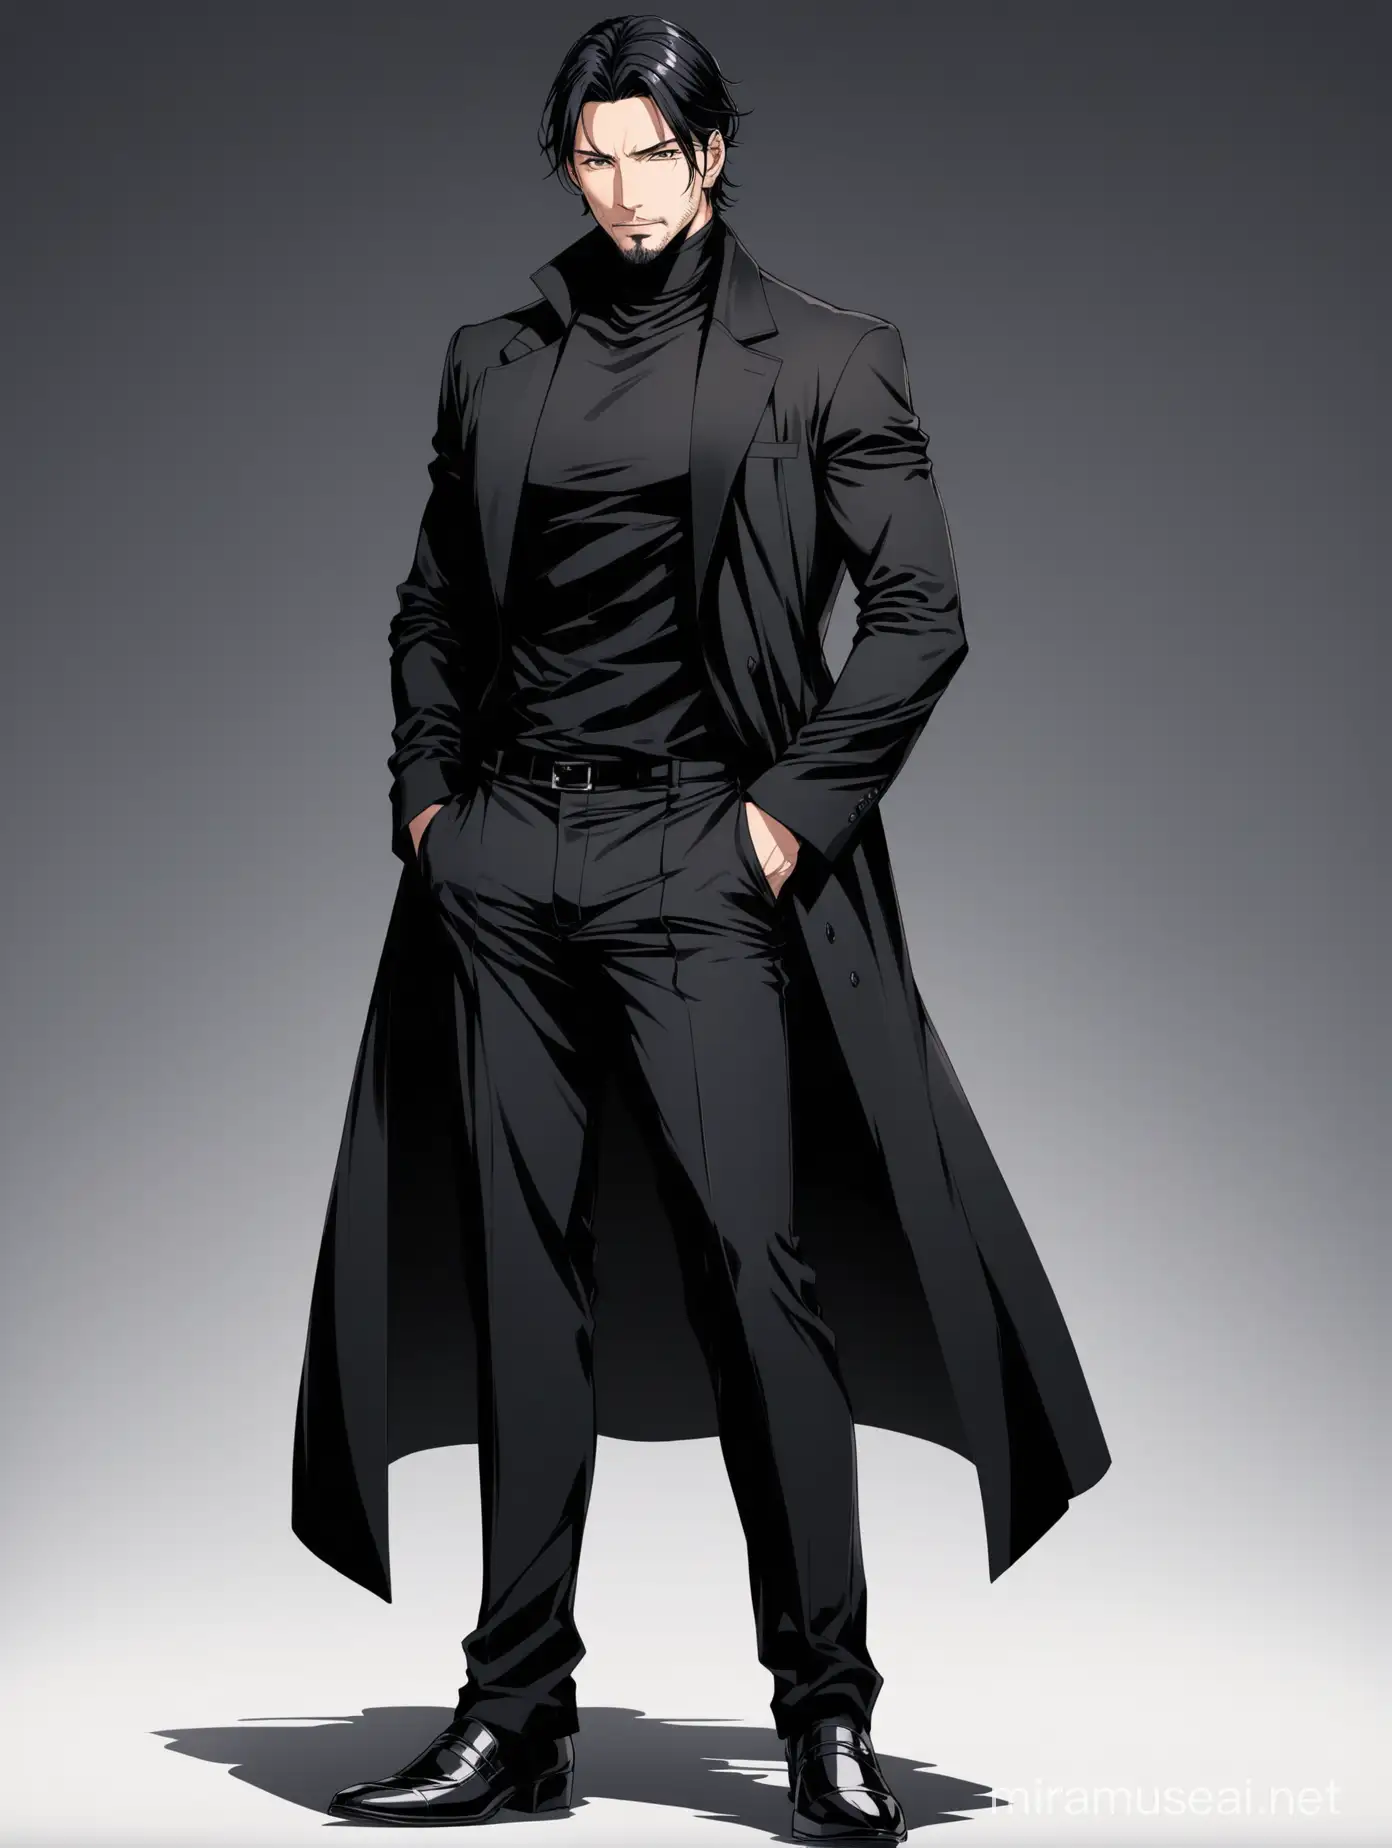 Anime handsome man in his forties, wearing black clothes (black suit, black turtleneck, long black coat, black pants, and black shoes), with black hair.